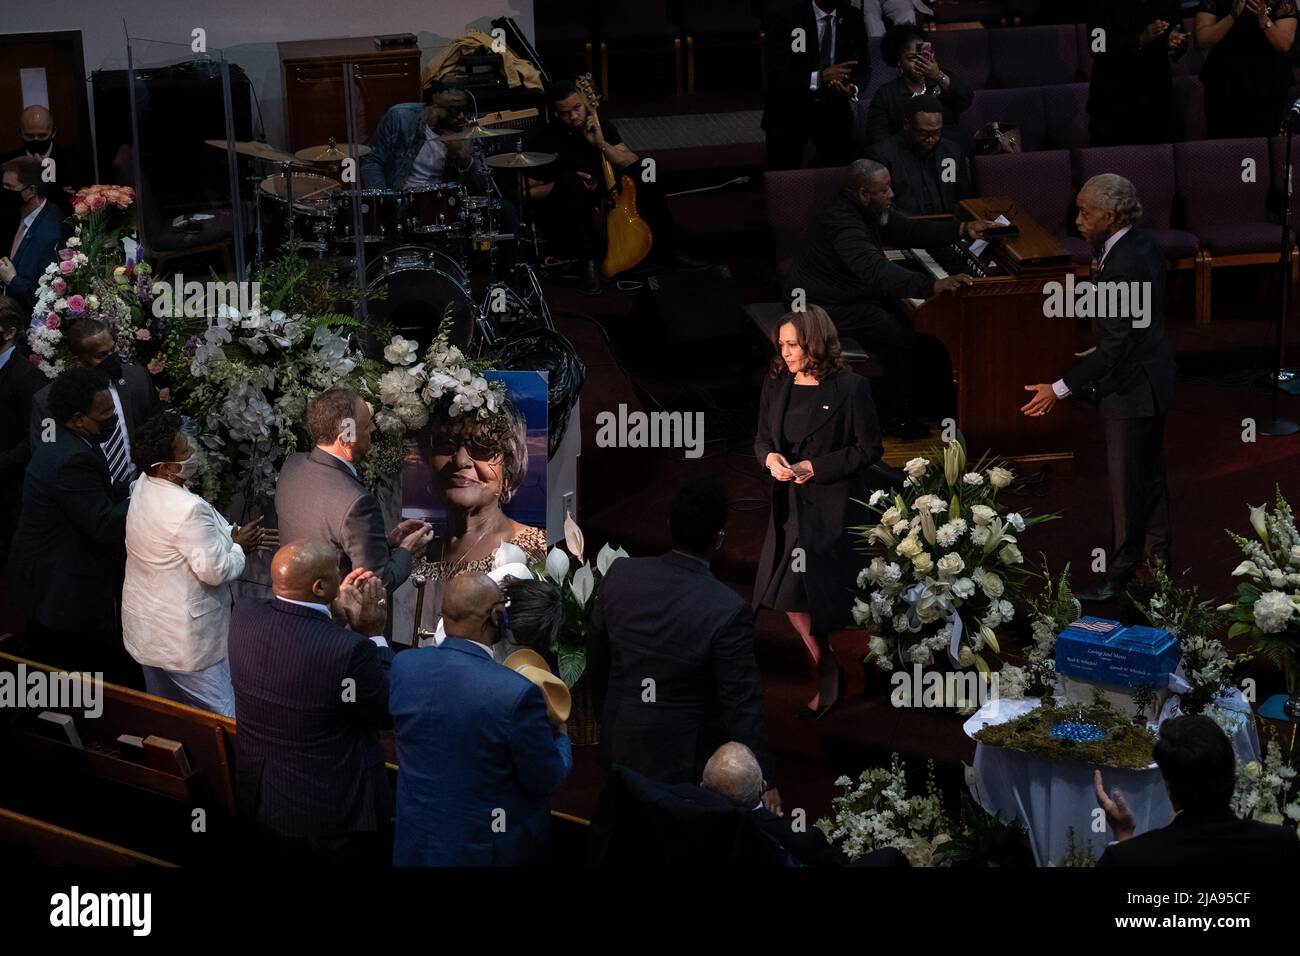 US Vice President Kamala Harris is seen here walking back to her seat after talking to people in attendance of Ruth Whitfield whom was one of the victimns of the racially motivated attack that happened on May 14th in Buffalo, NY, USA. Photo by Malik Rainey/Pool/ABACAPRESS.COM Stock Photo